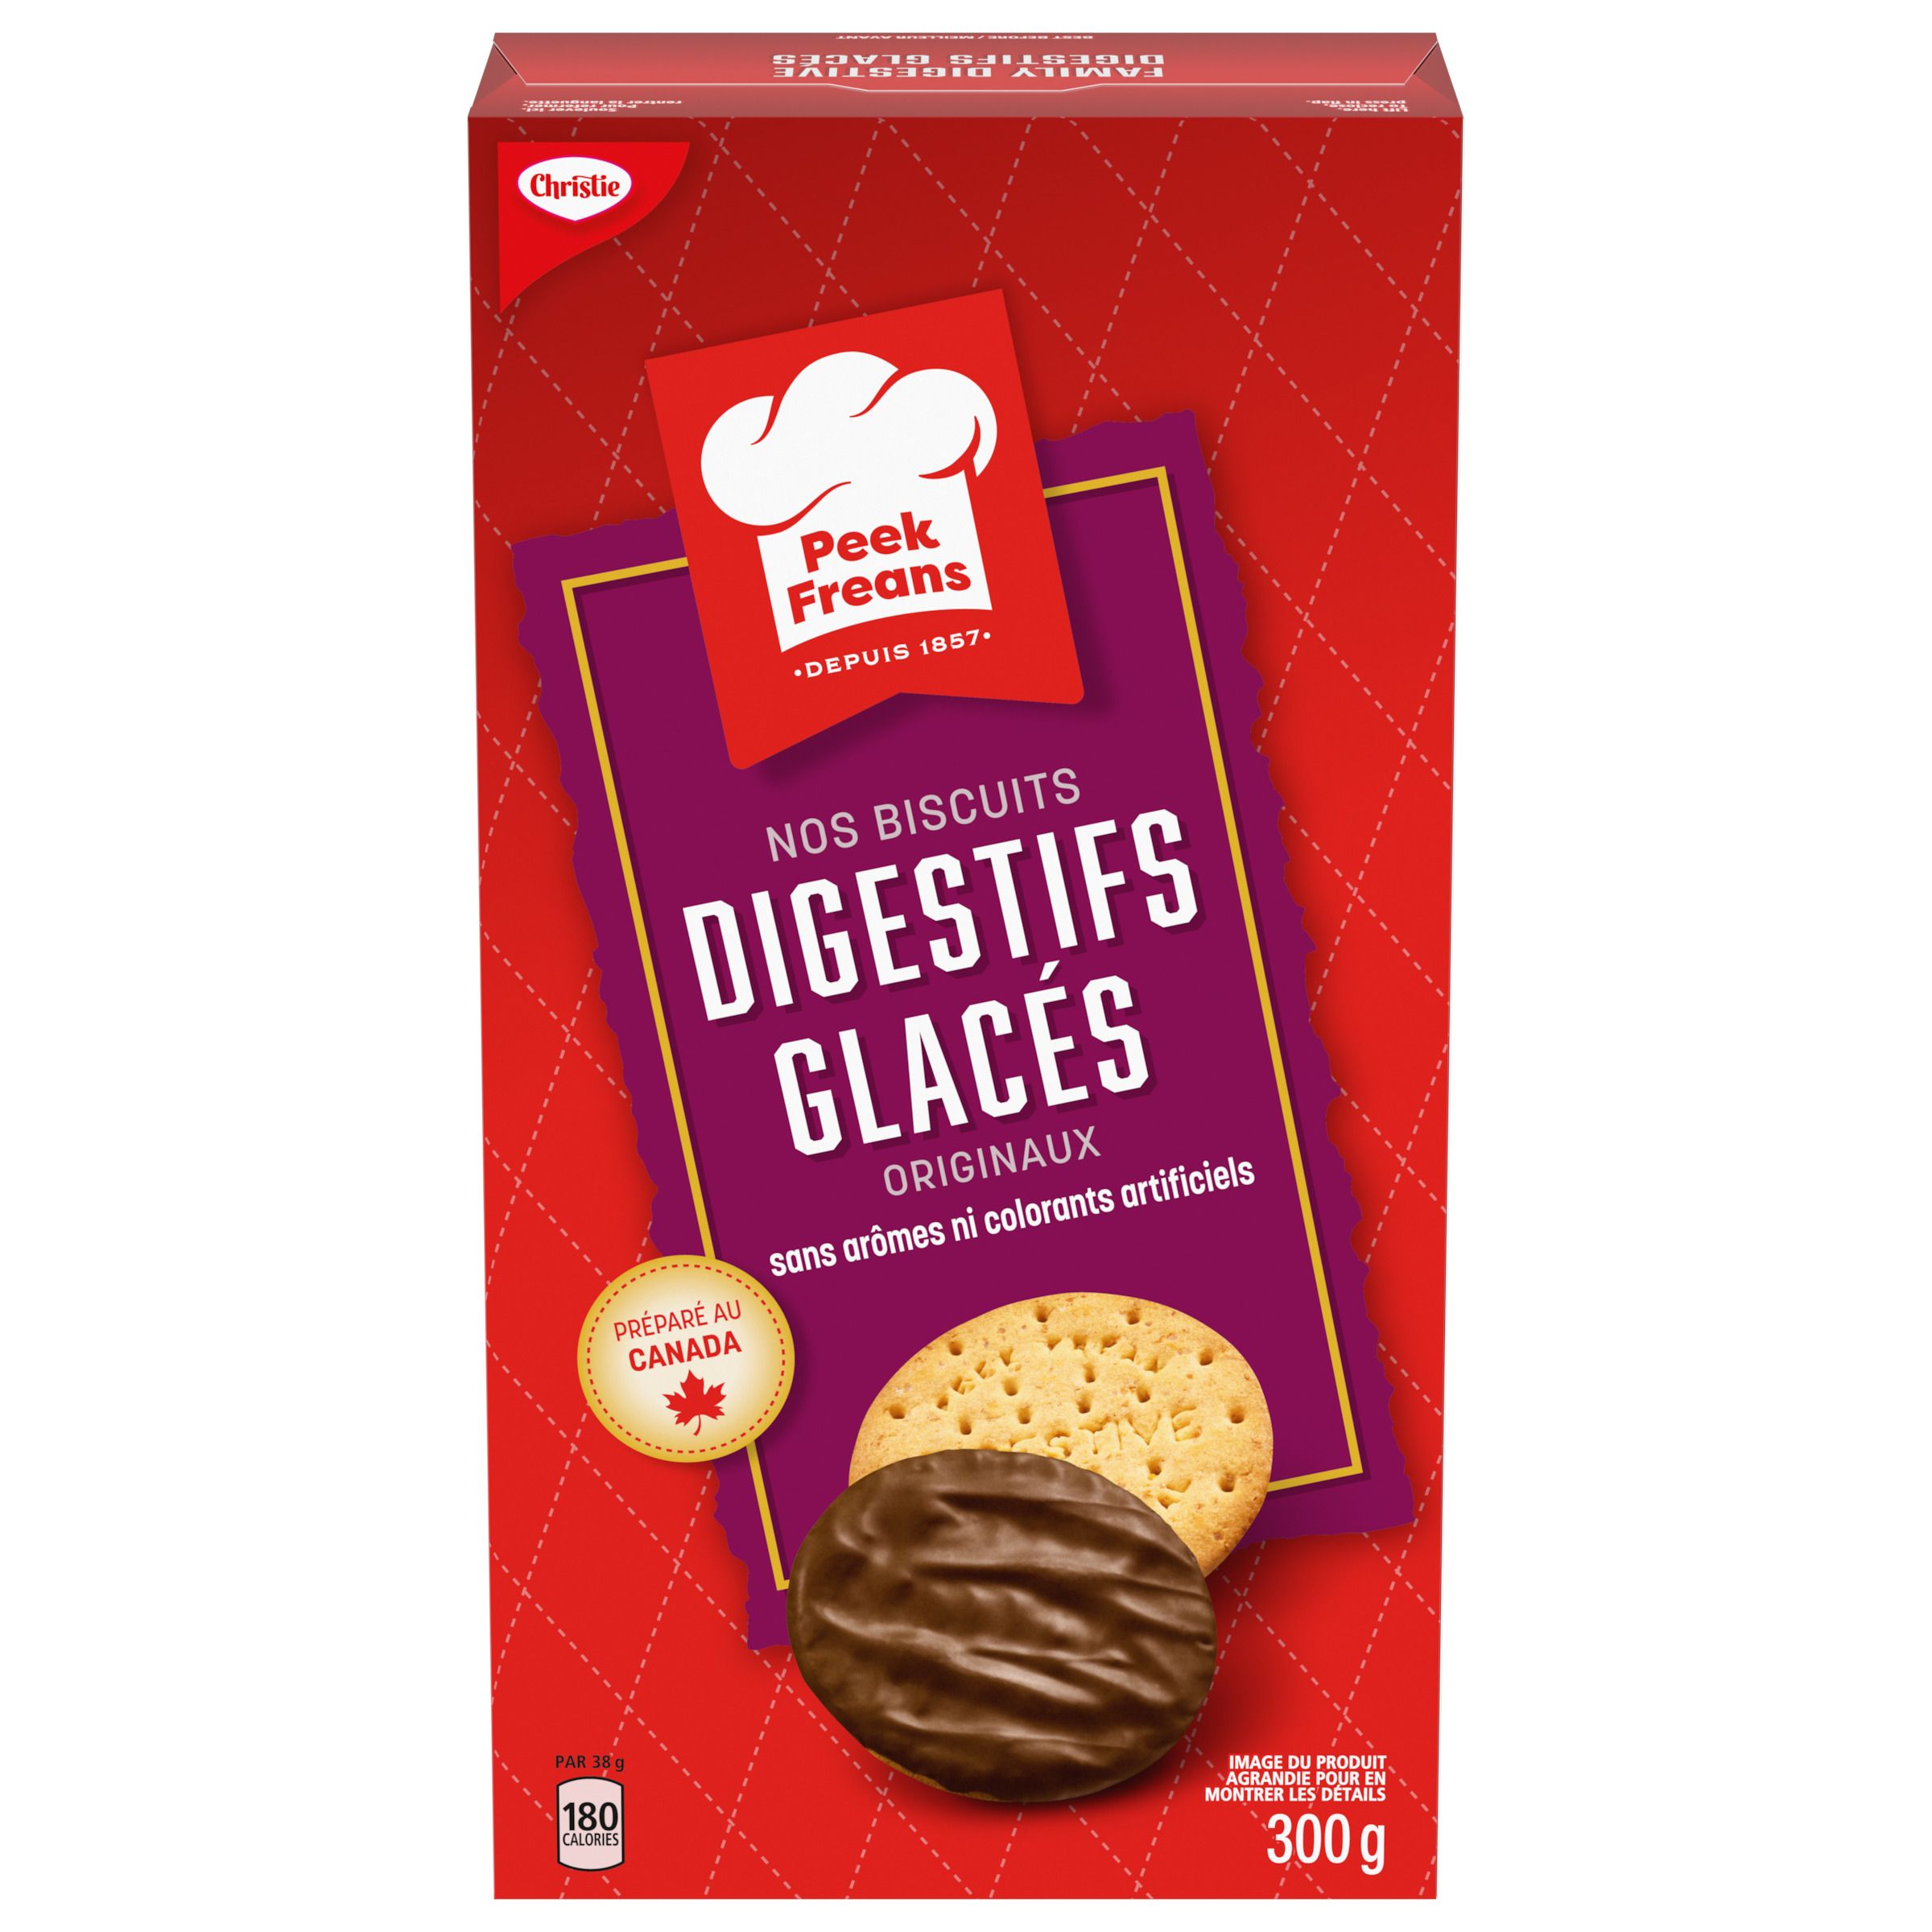 Peek Freans Family Digestive Biscuit, 300g -1